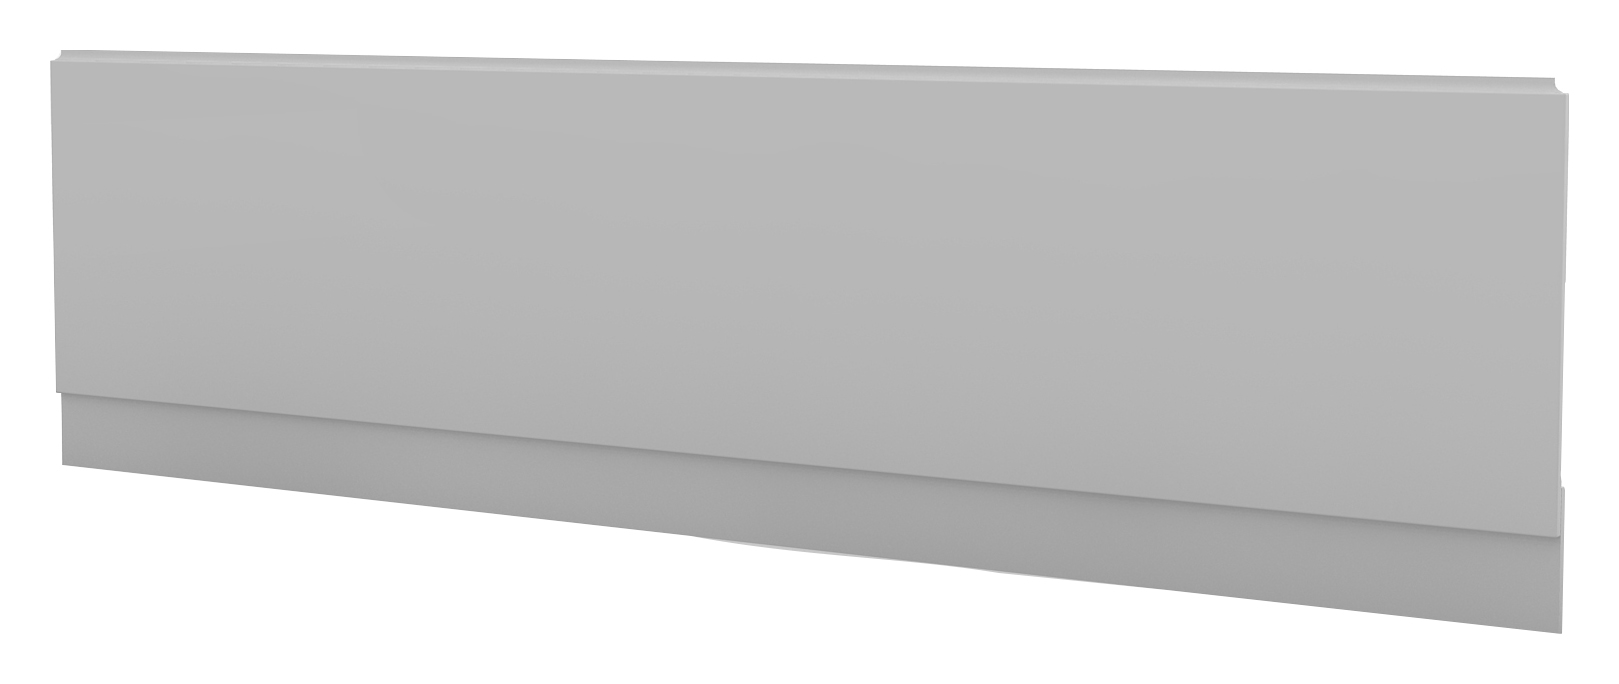 Image of Duarti By Calypso 1800mm Bath Front Panel with Plinth - White Varnish